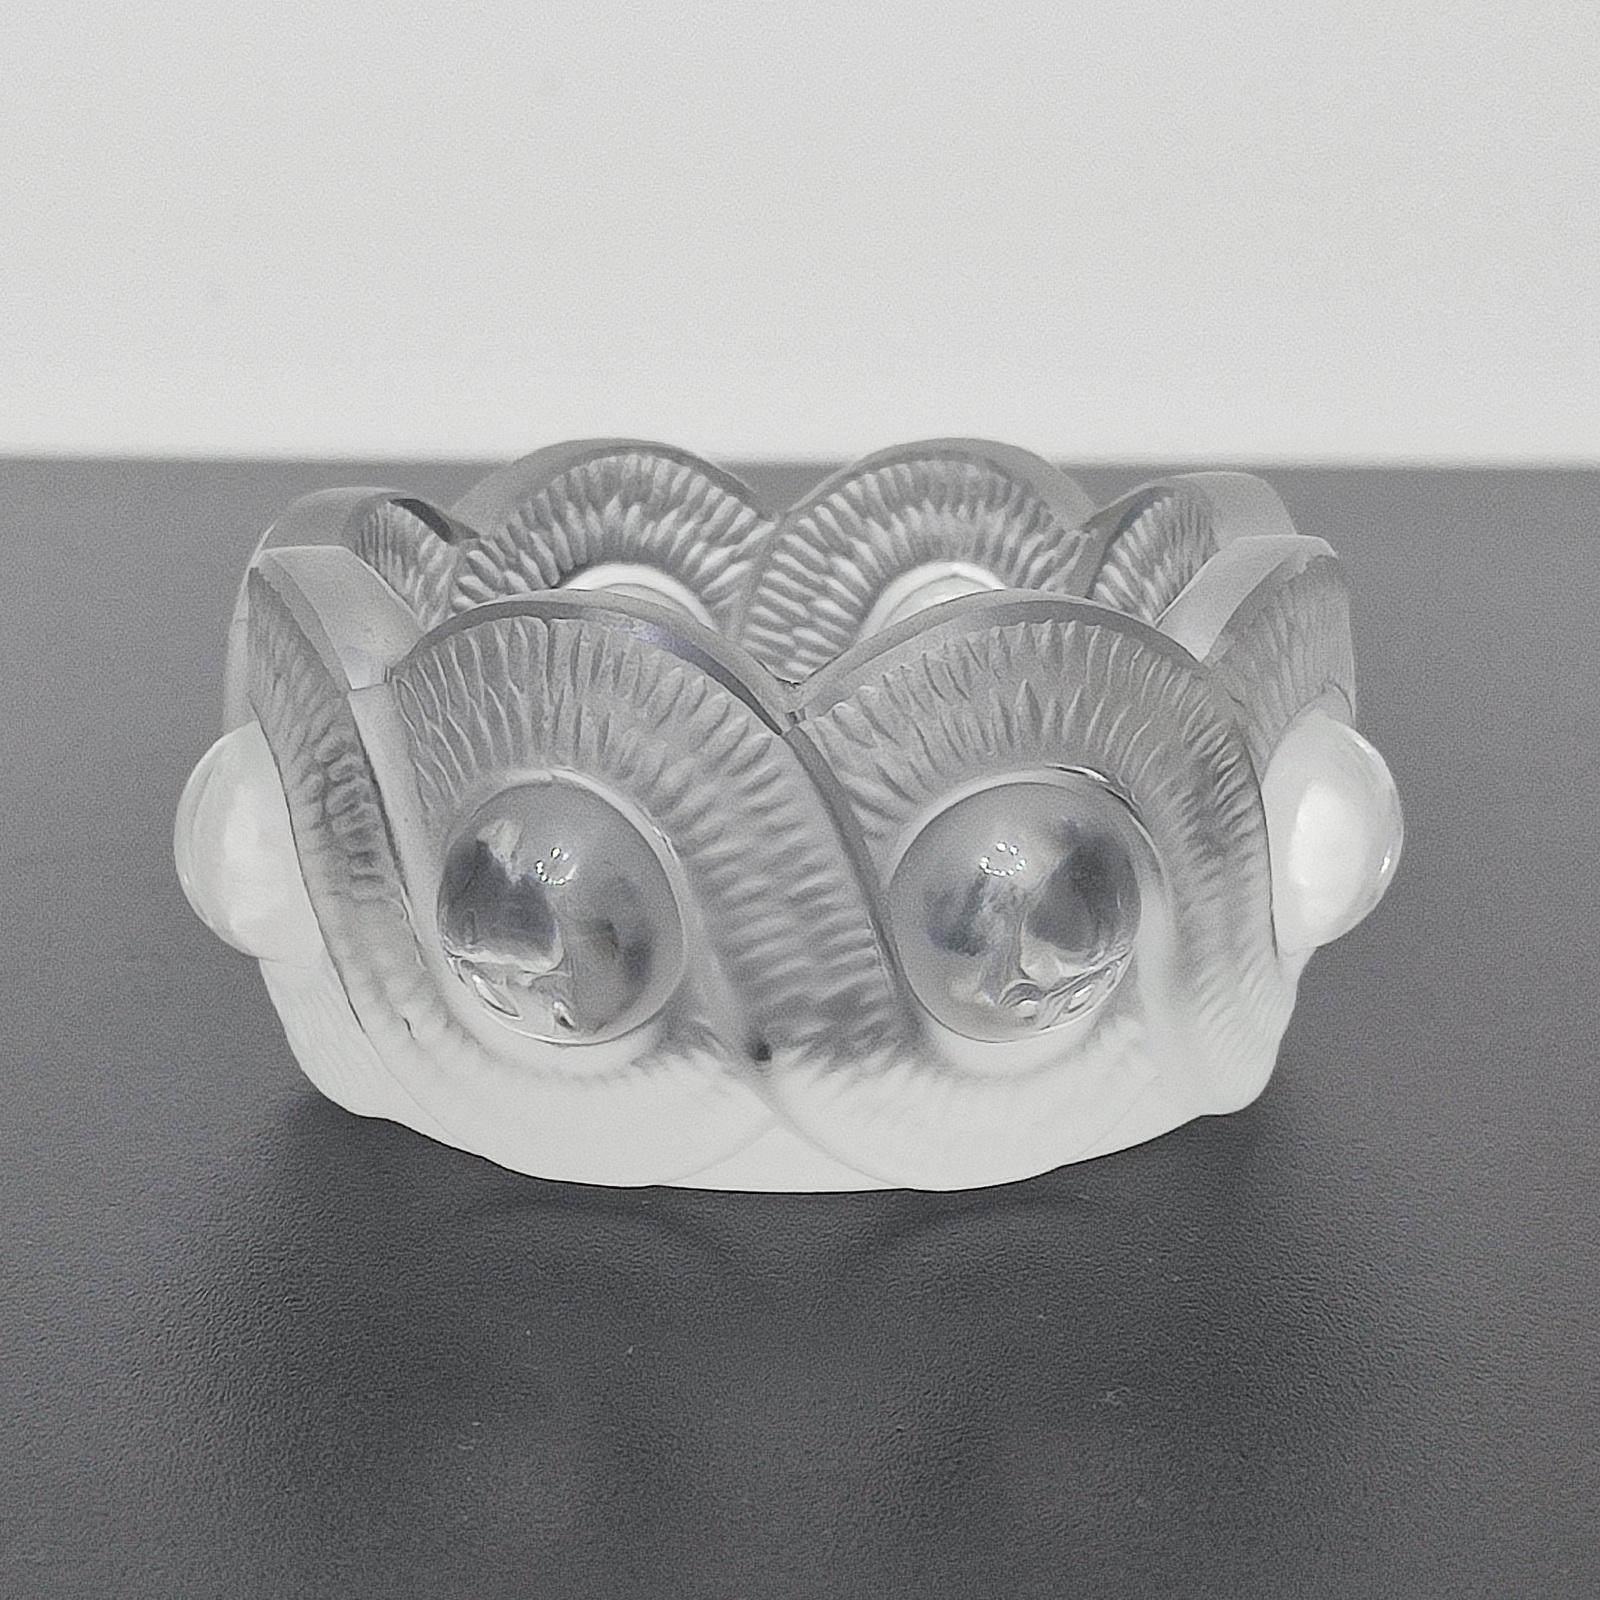 Vintage crystal Lalique France Gao ashtray / bowl. Satin serpentine border with clear round hemispheres. Marked on bottom 